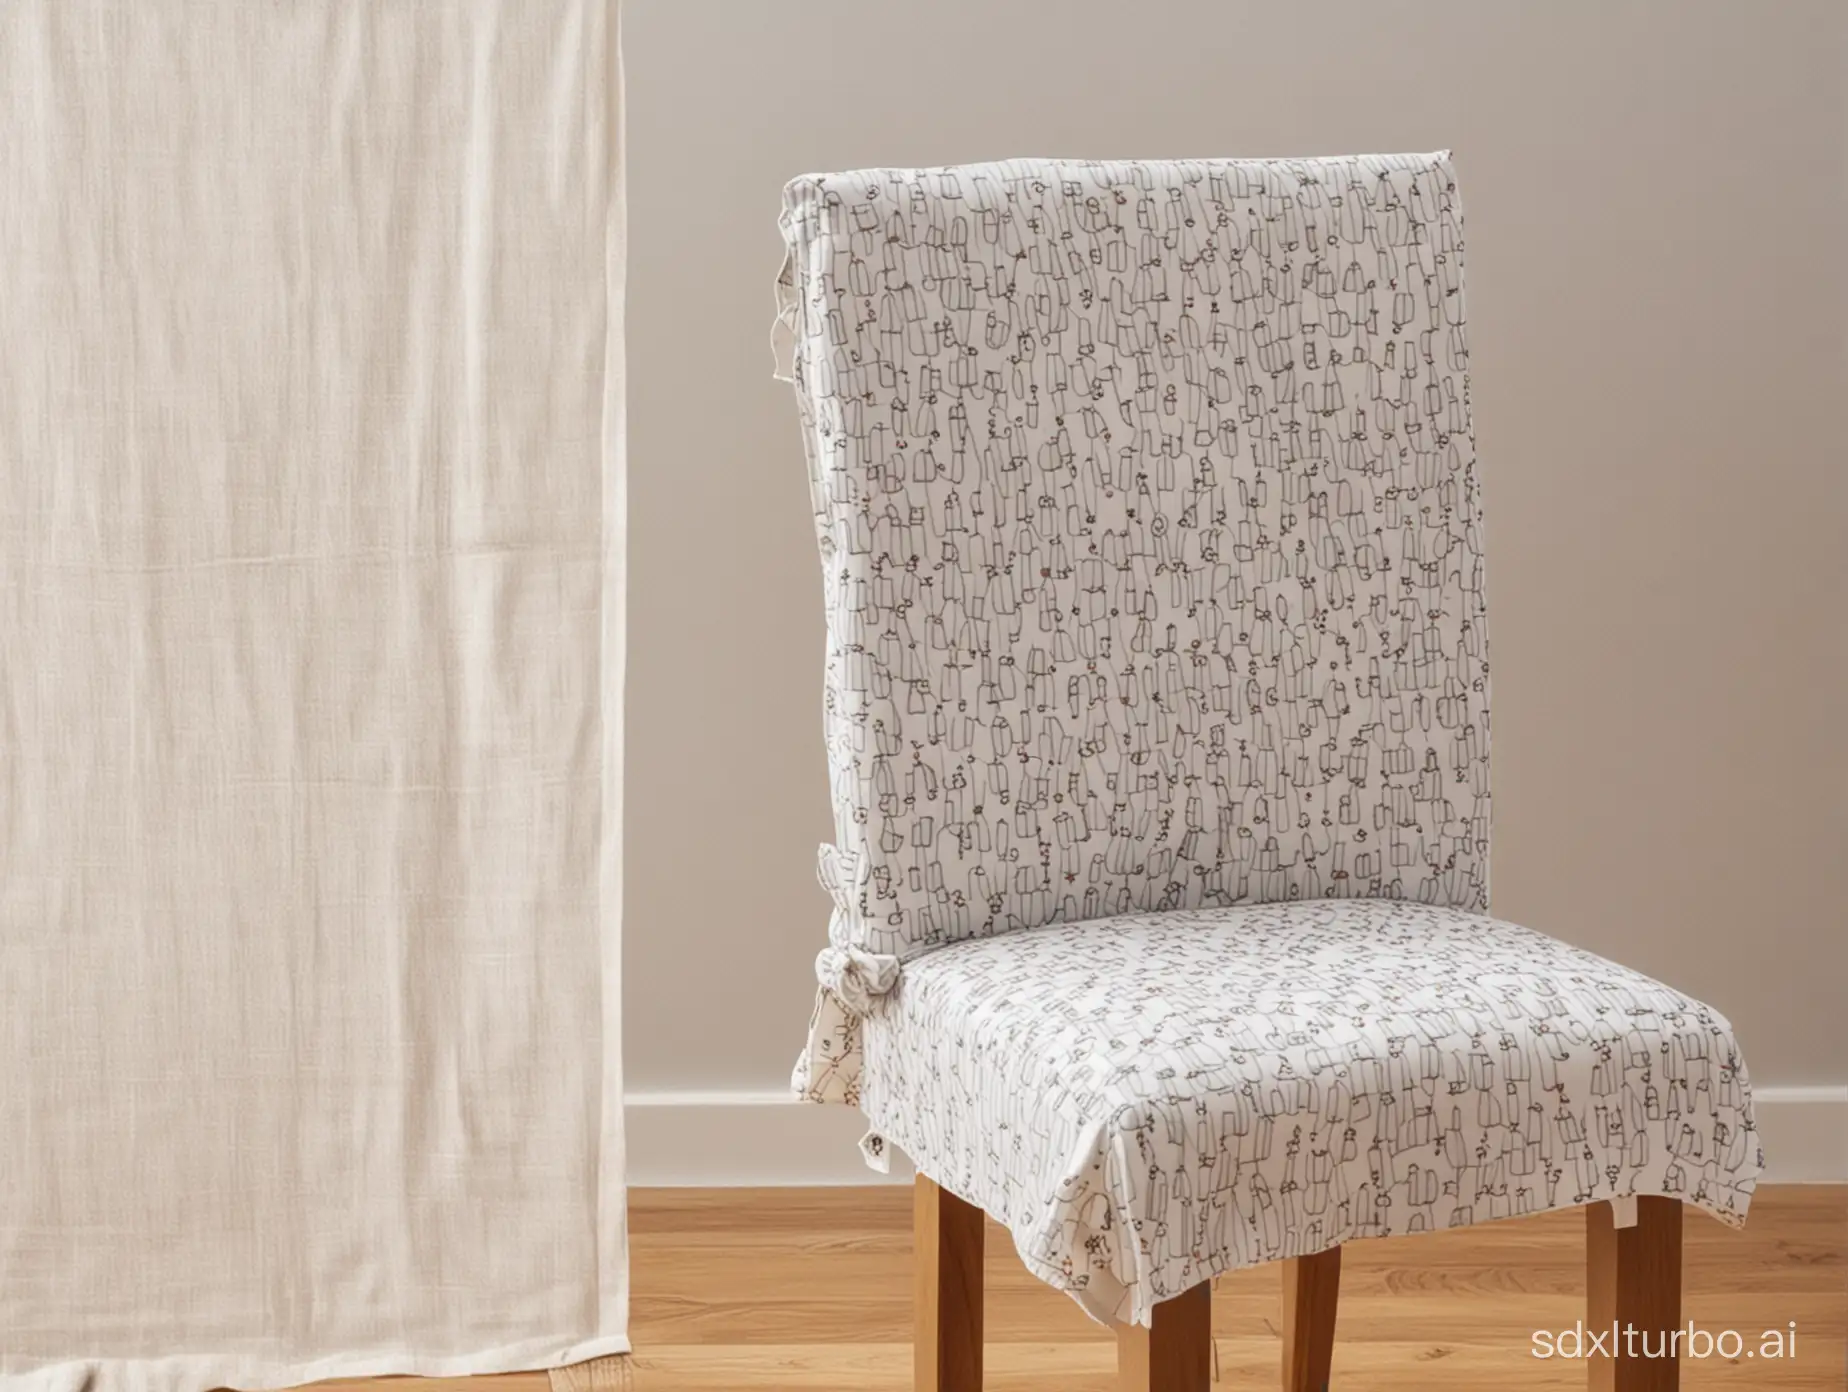 Sewing pattern for chair cover 0.5 m x 2 m x 0.1 m